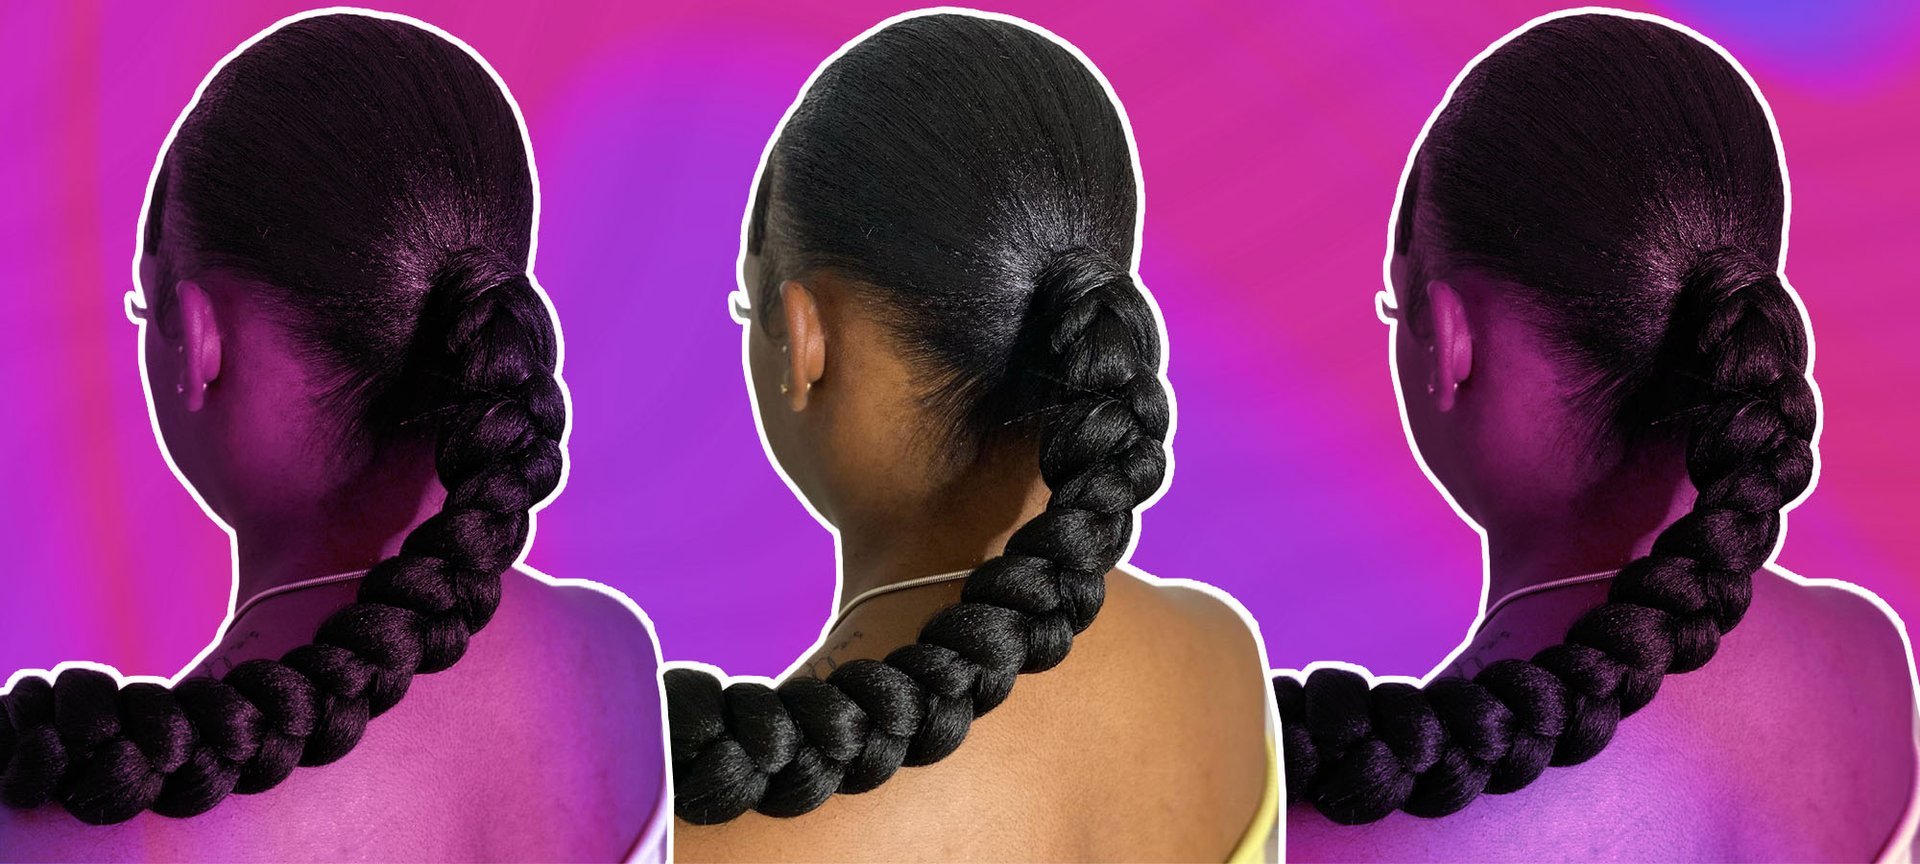 8 Cute Ponytail Hairstyles For Summer! - YouTube